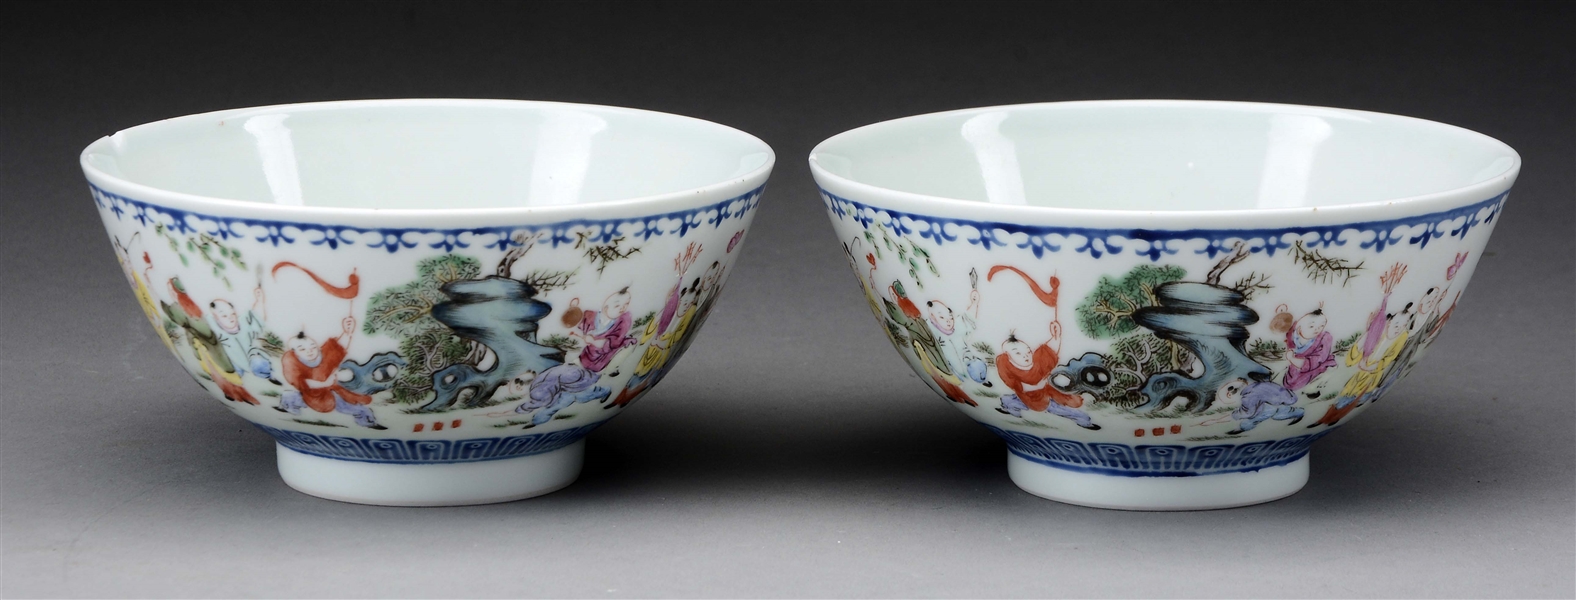 A PAIR OF PORCELAIN TEA BOWLS WITH DAOGUANG MARK. 